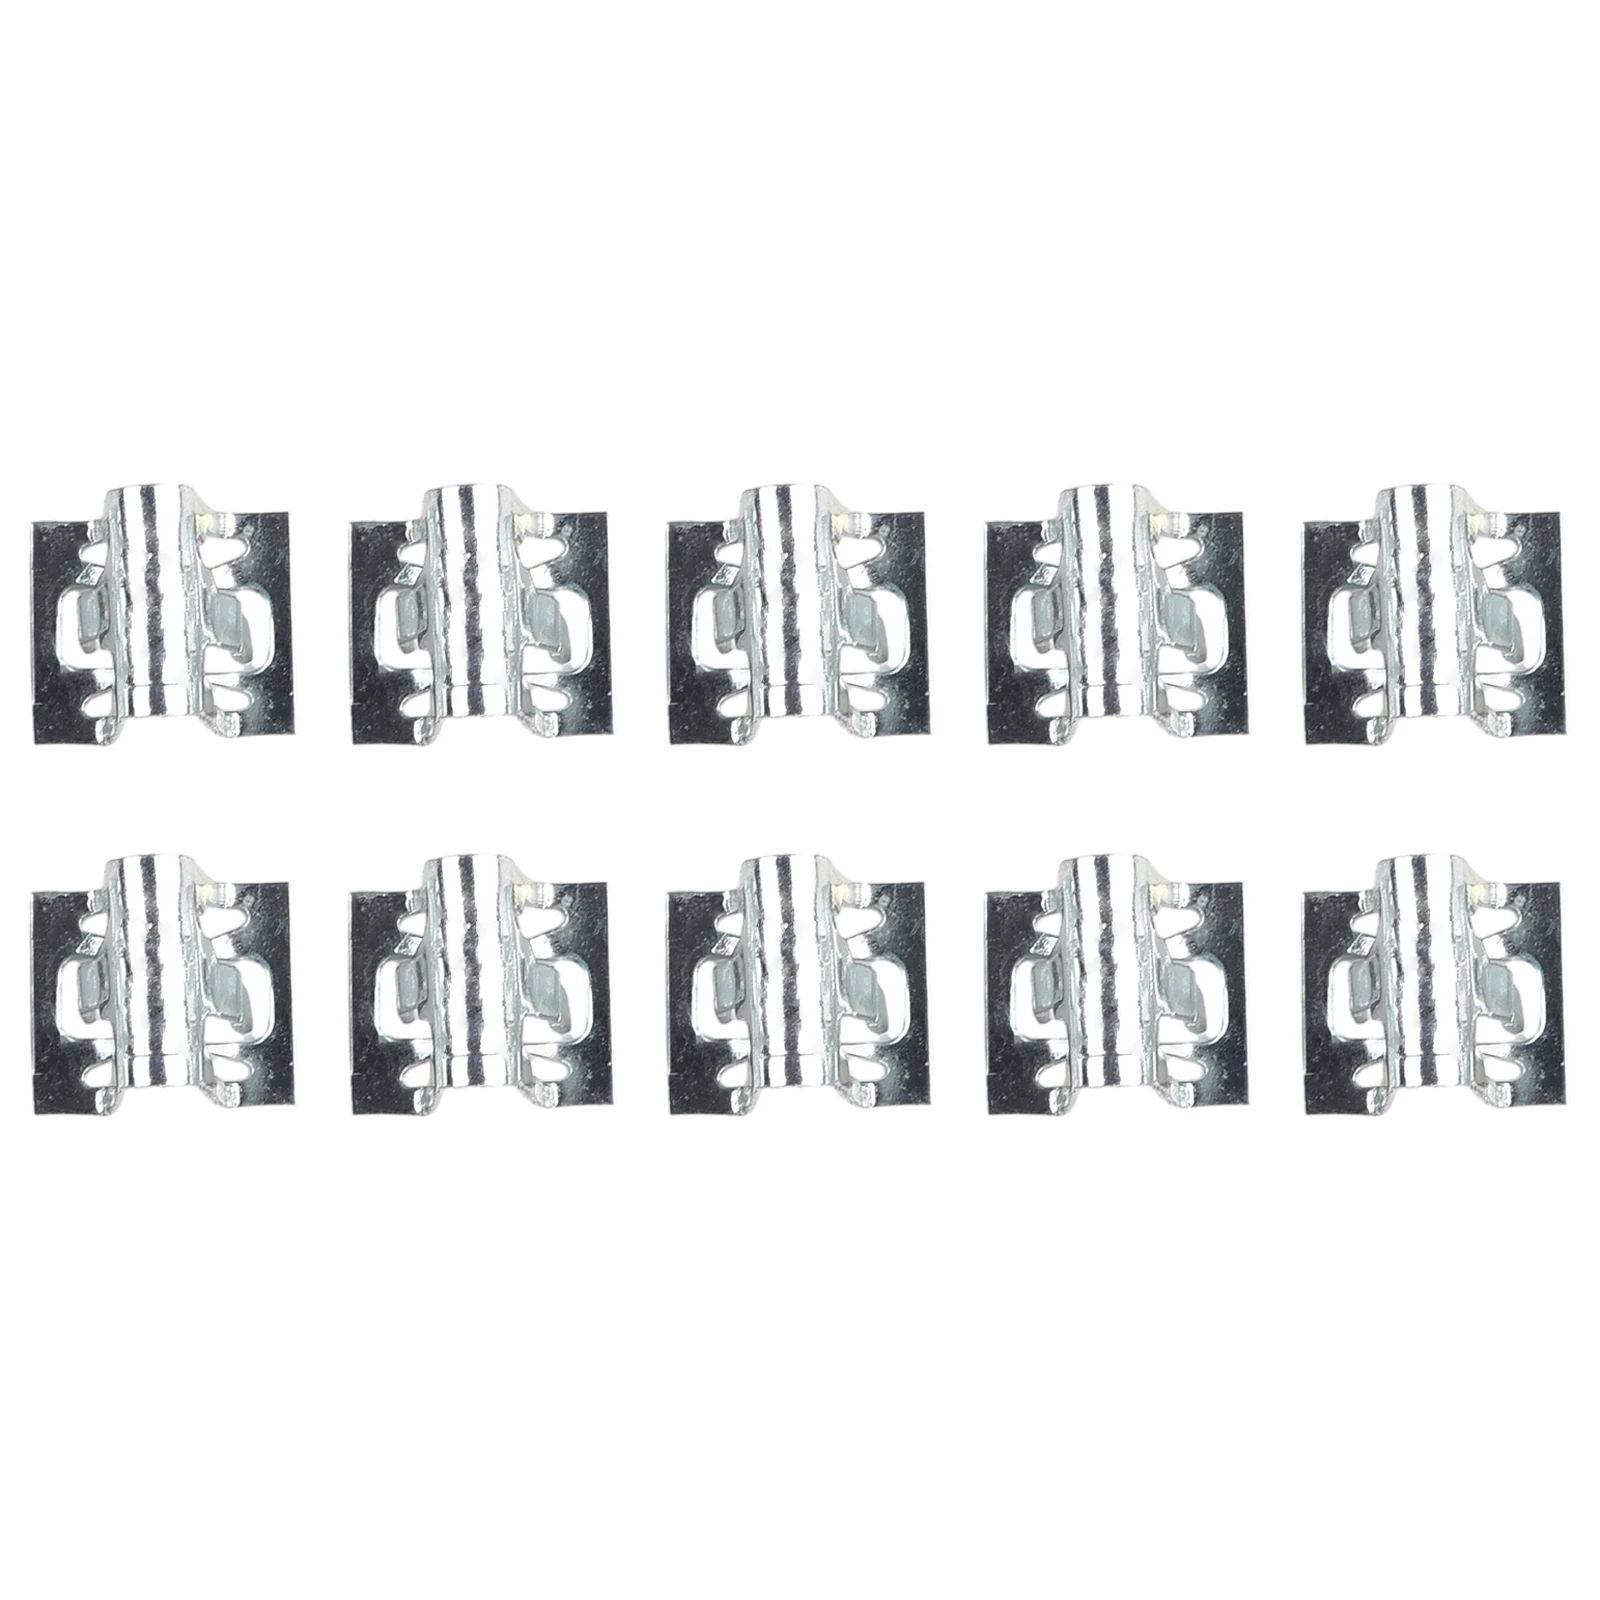 

High Quality Brand New Car Retainer Clip Metal Clips Wires Fixing 10Pcs Car Dashboards Car Fasteners And Clips